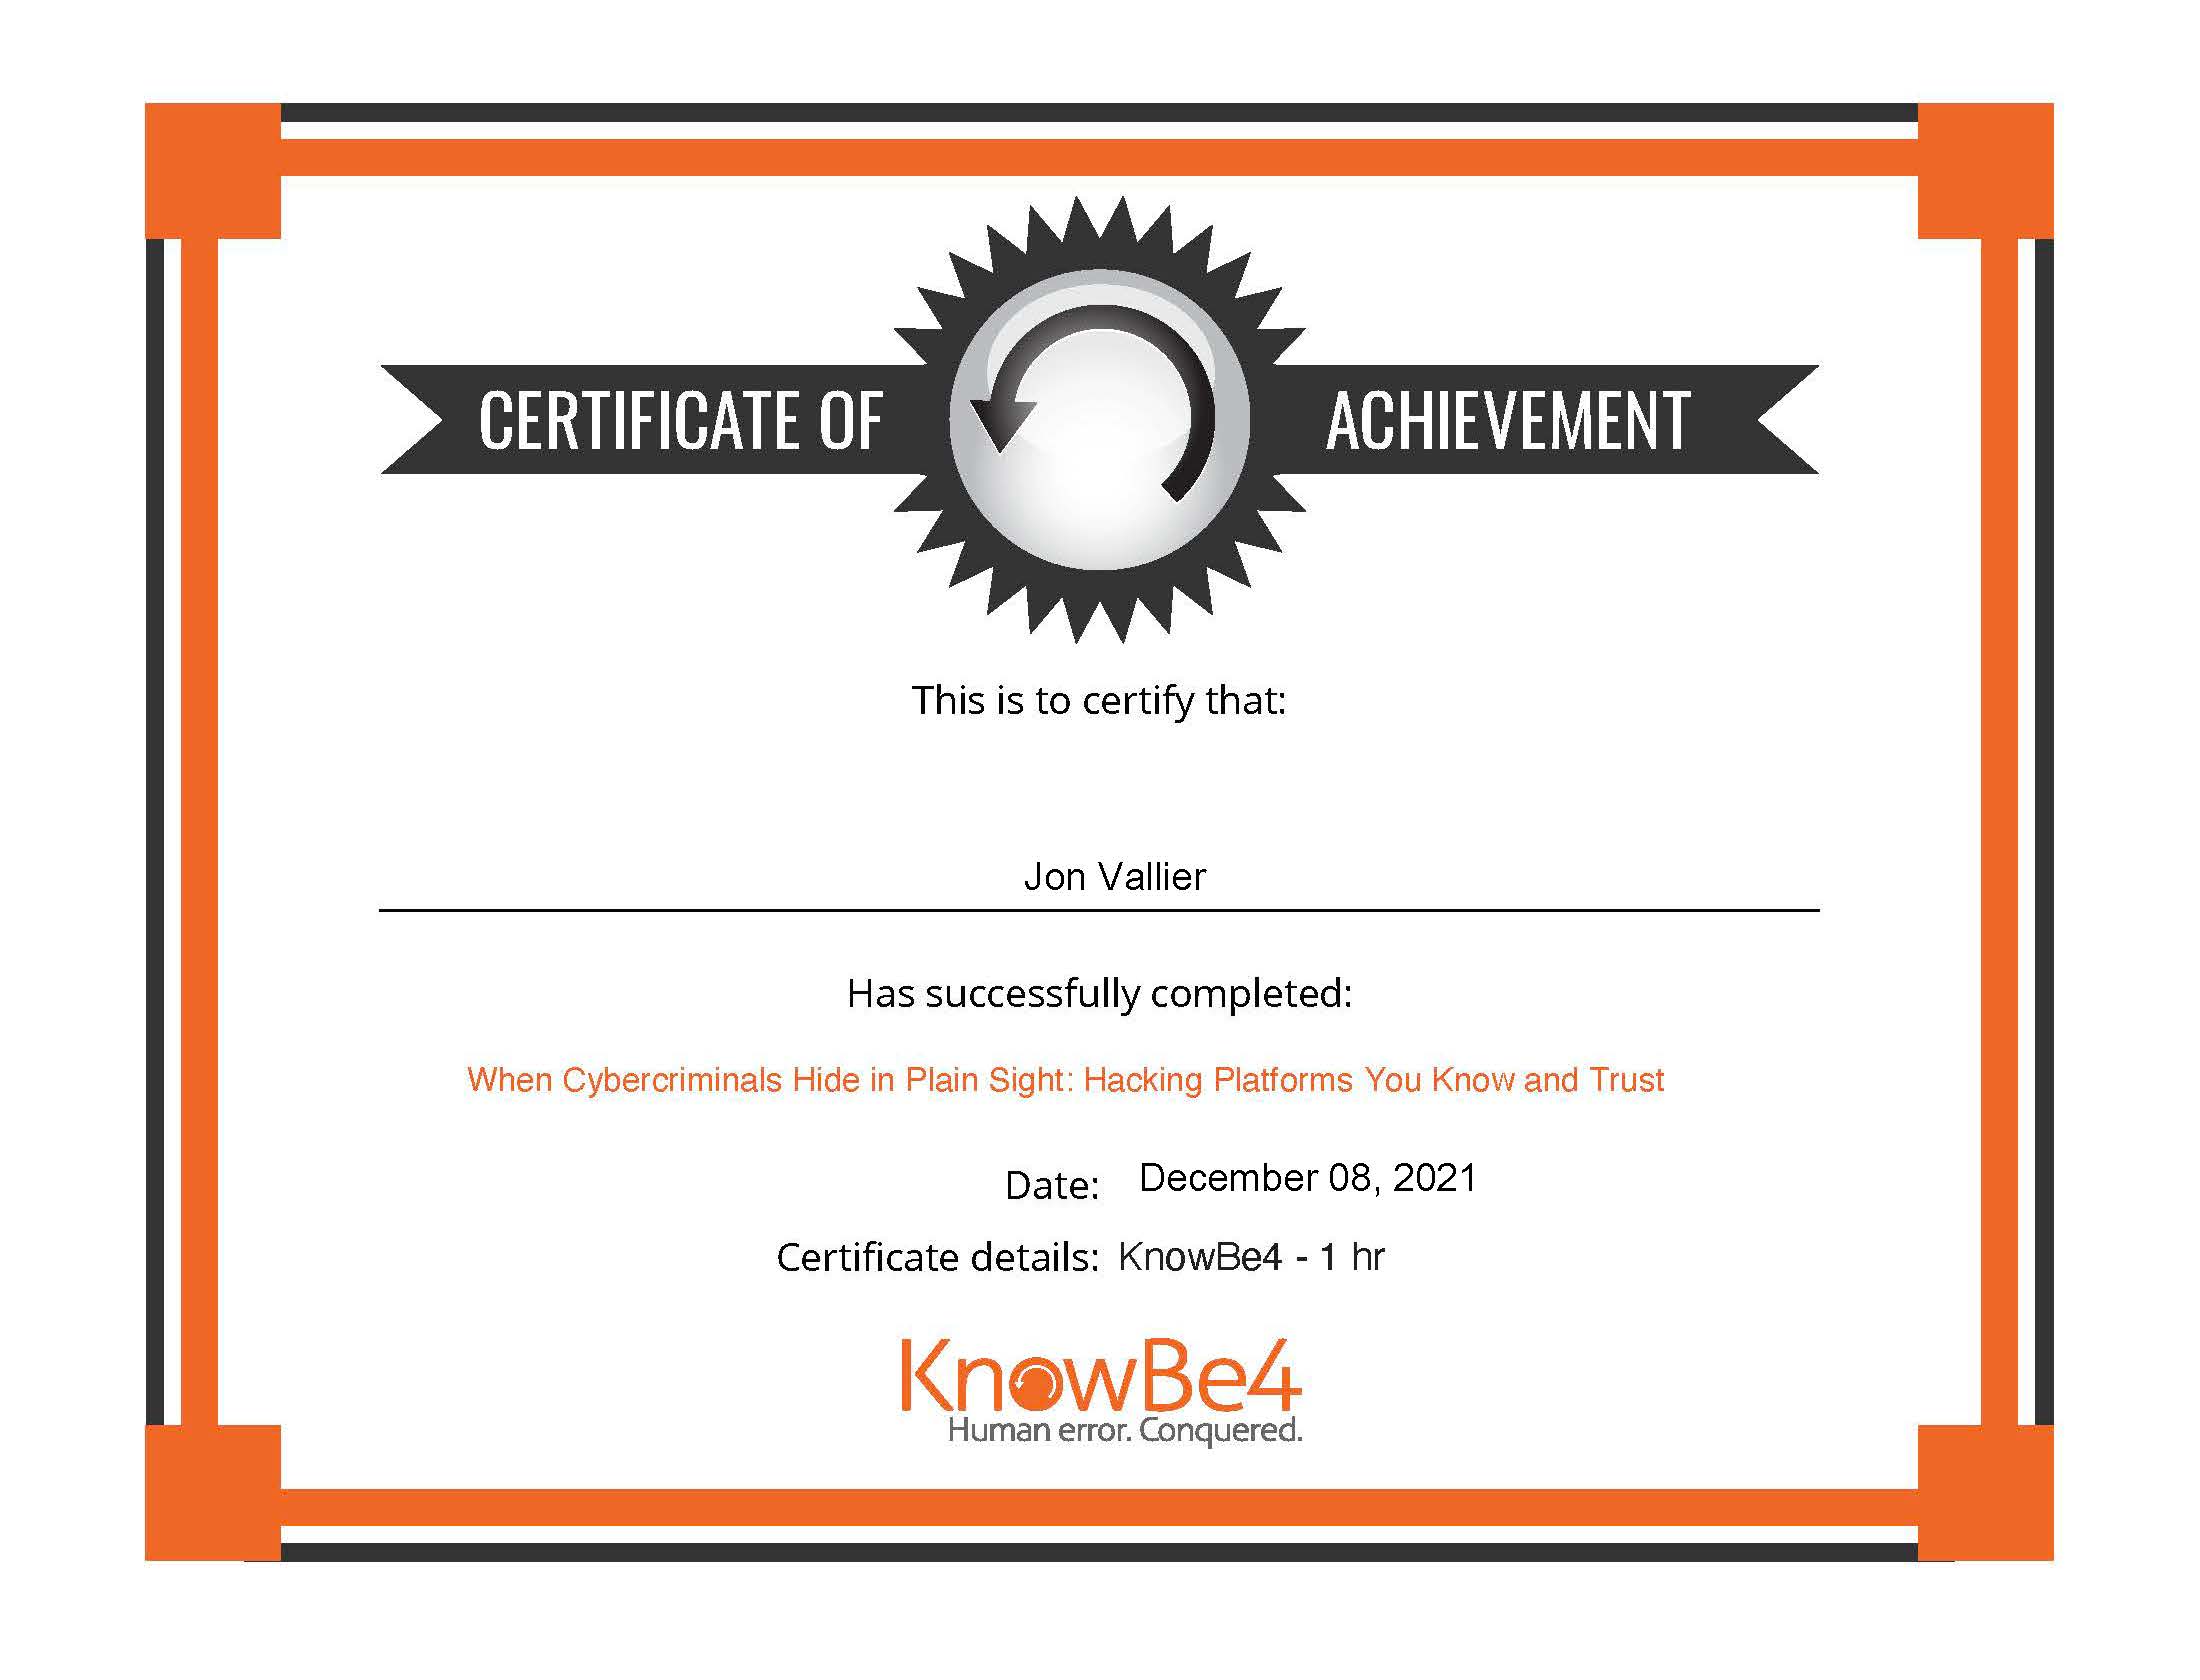 Attended webinar “When Cybercriminals Hide in Plain Sight: Hacking Platforms You Know and Trust” by KnowBe4